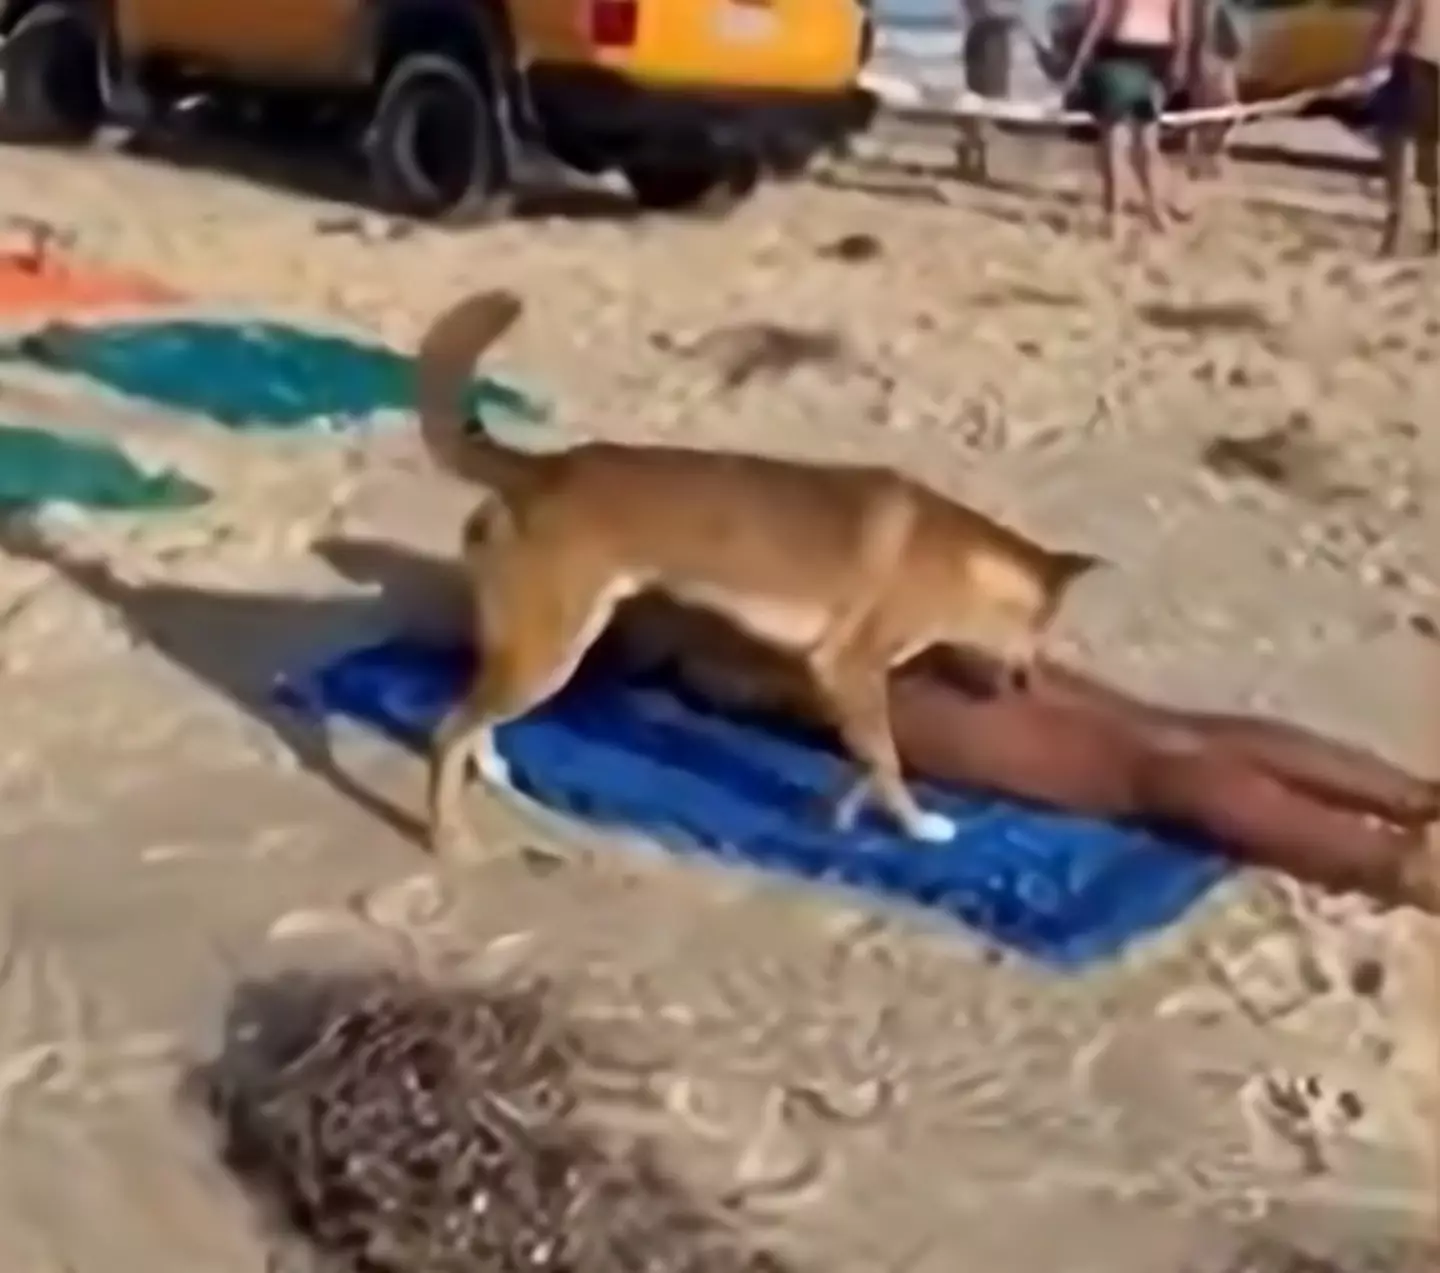 The dingo bit the woman on her behind, and has since been euthanised for the attack.